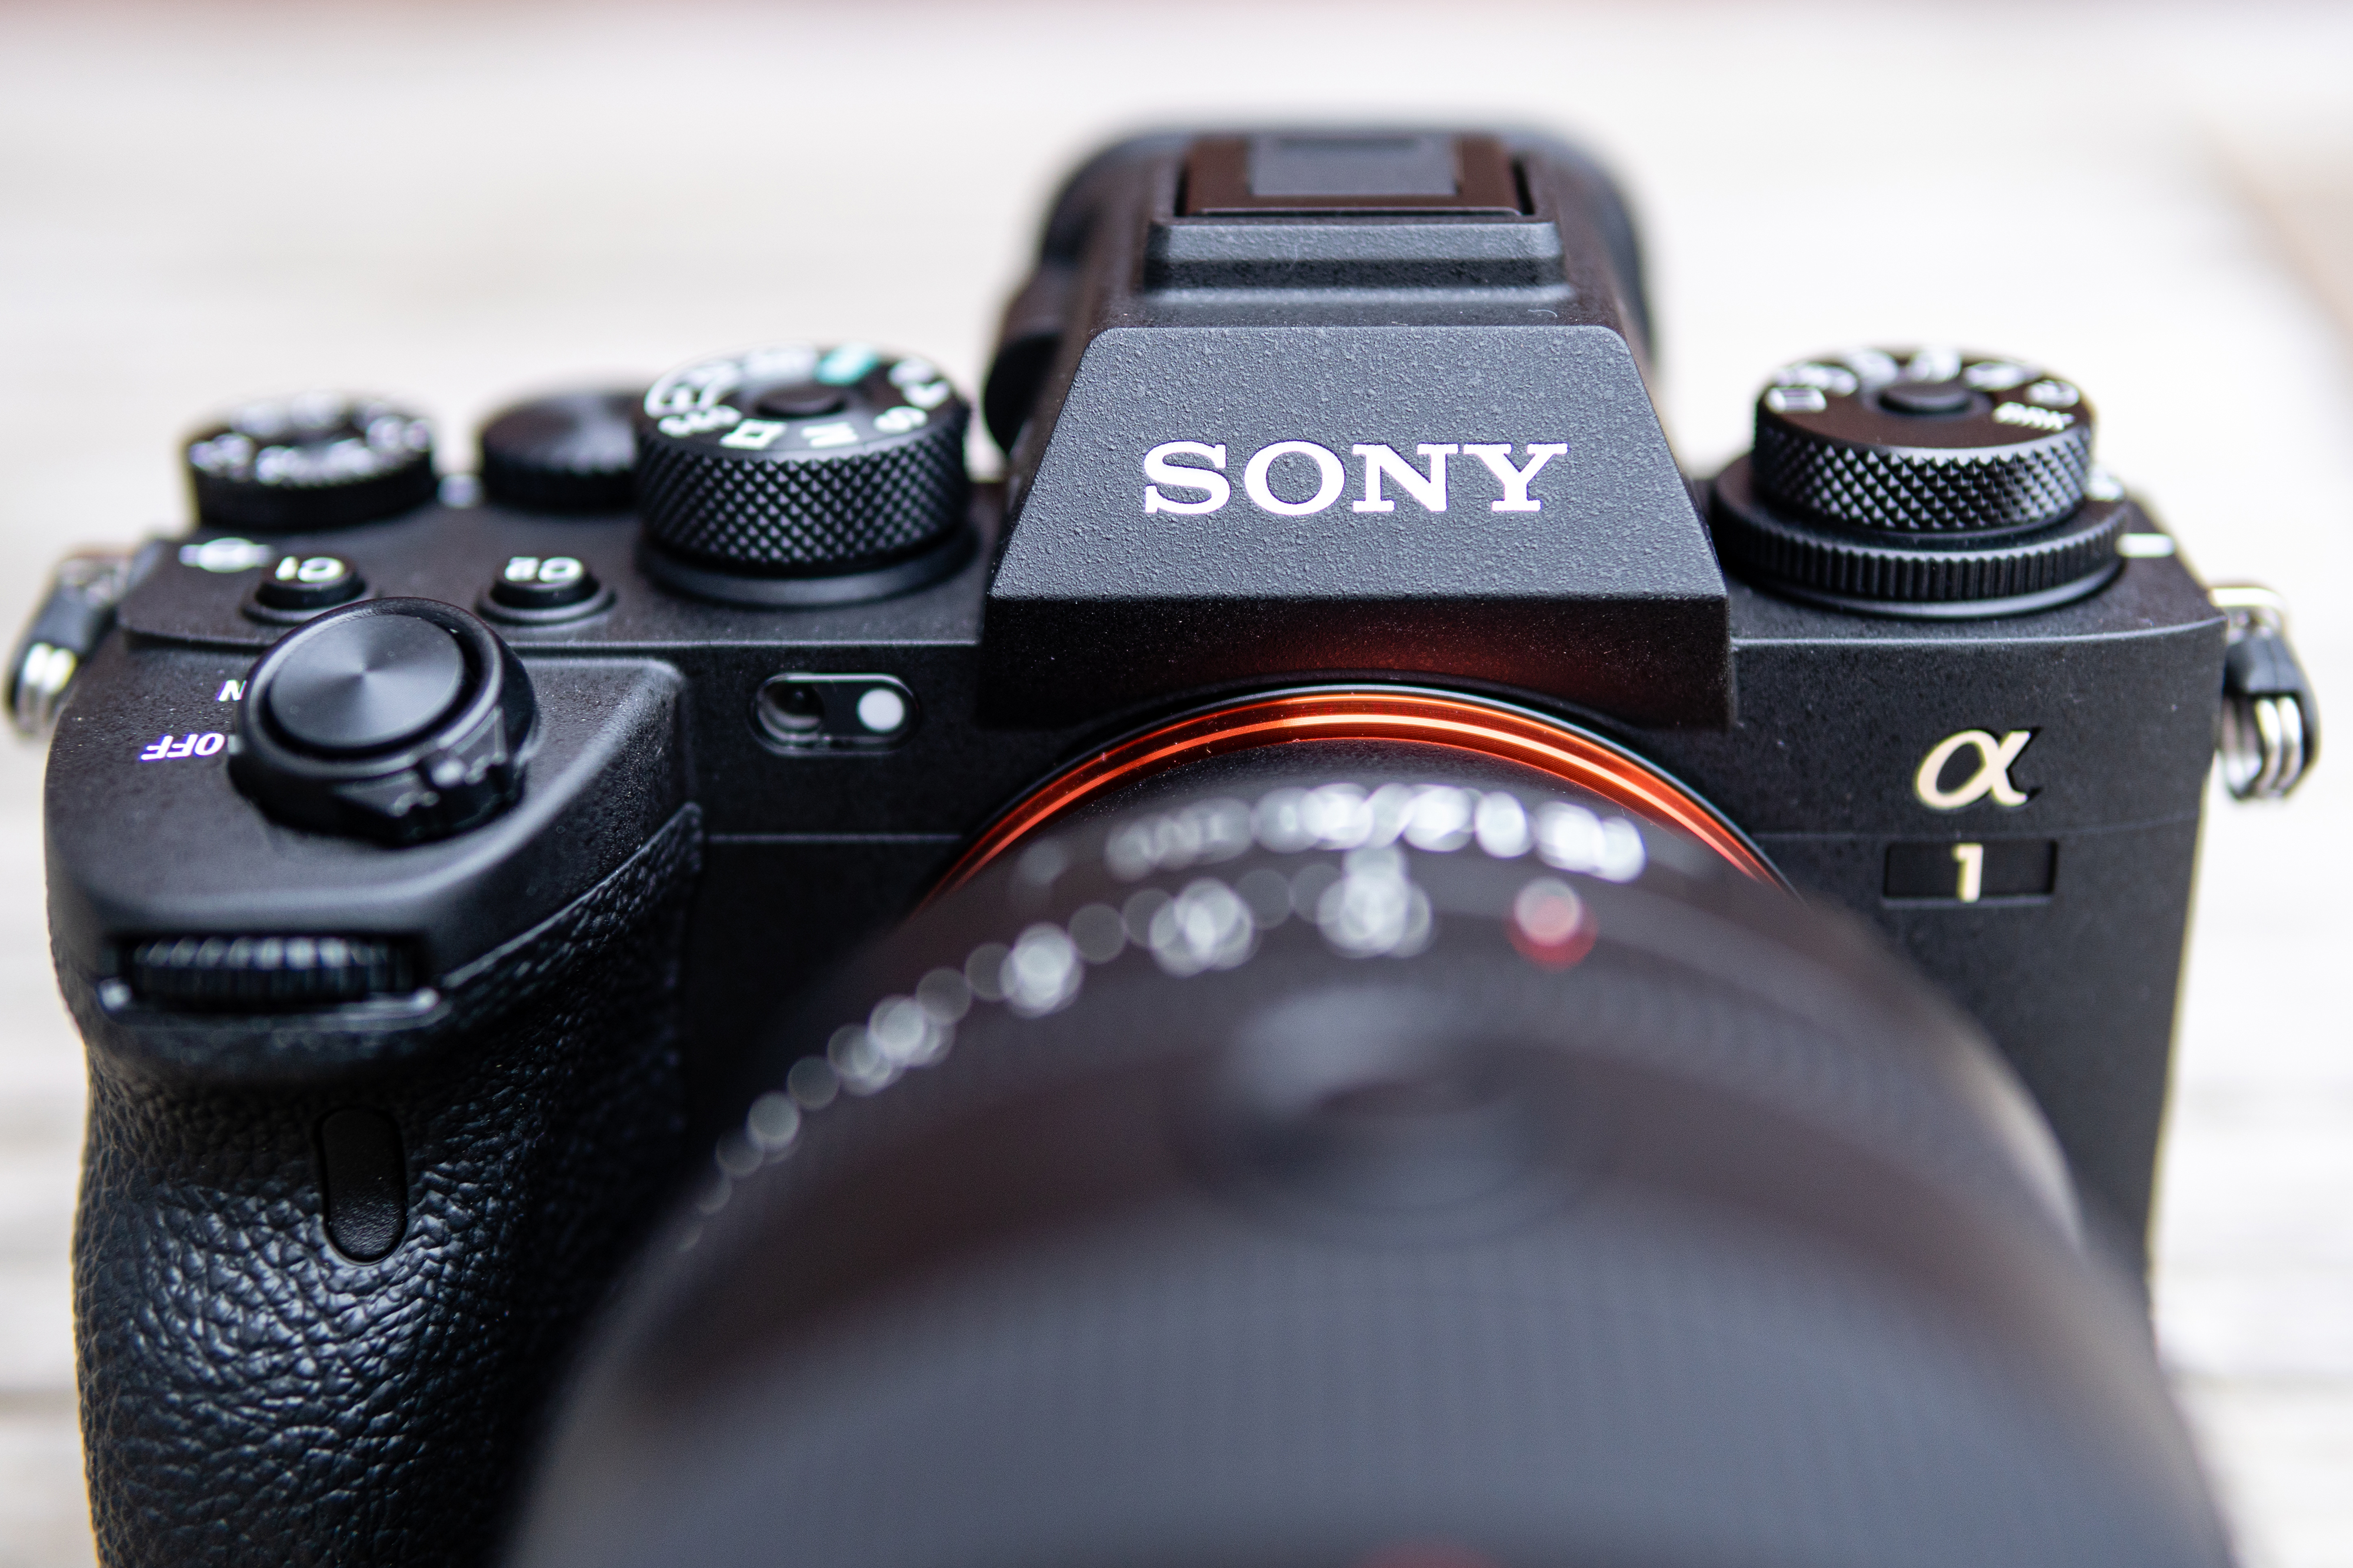 The top of the Sony A1 mirrorless camera